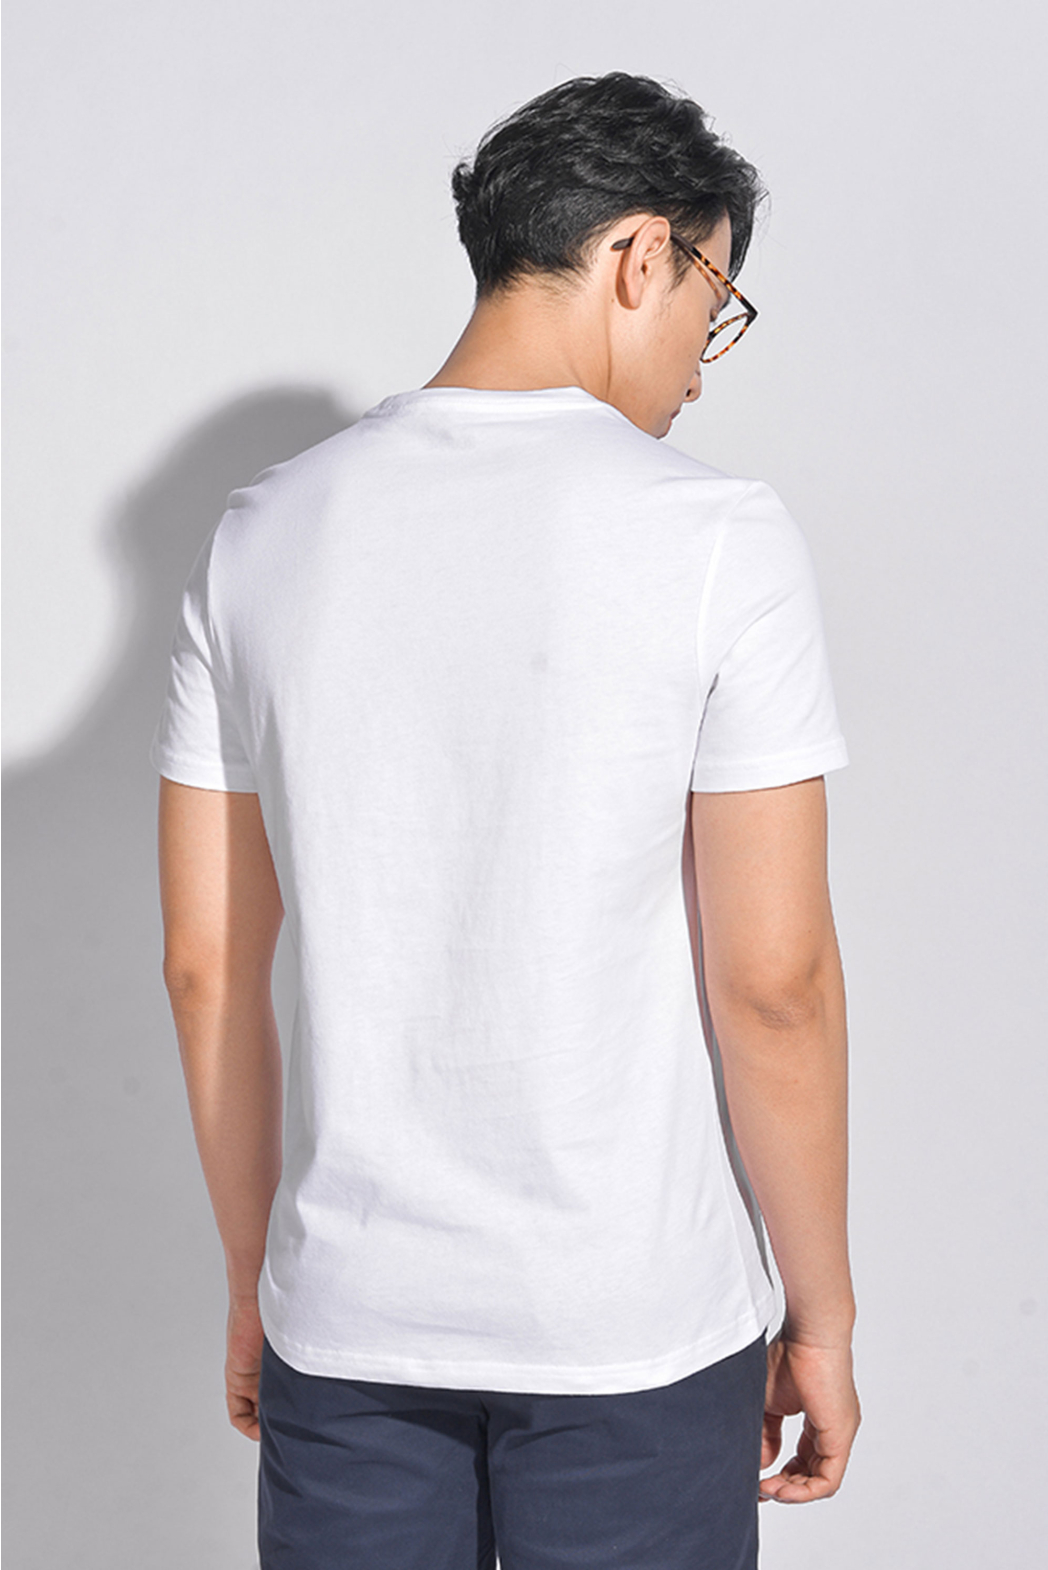 Áo thun tay ngắn, solid. Cotton. FITTED form - 10S20TSH037